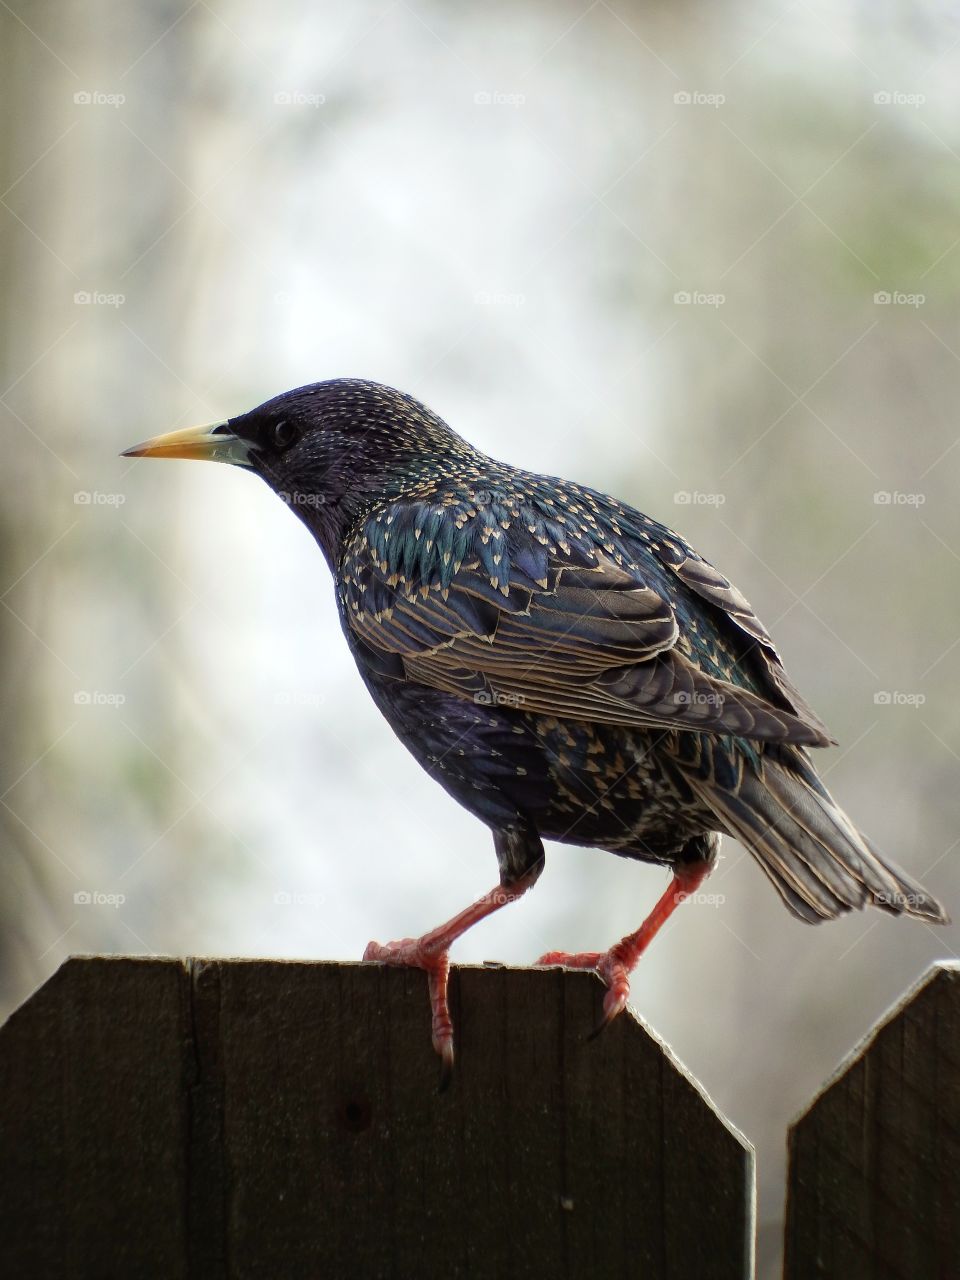 beautiful close up of speckled colorful starling.